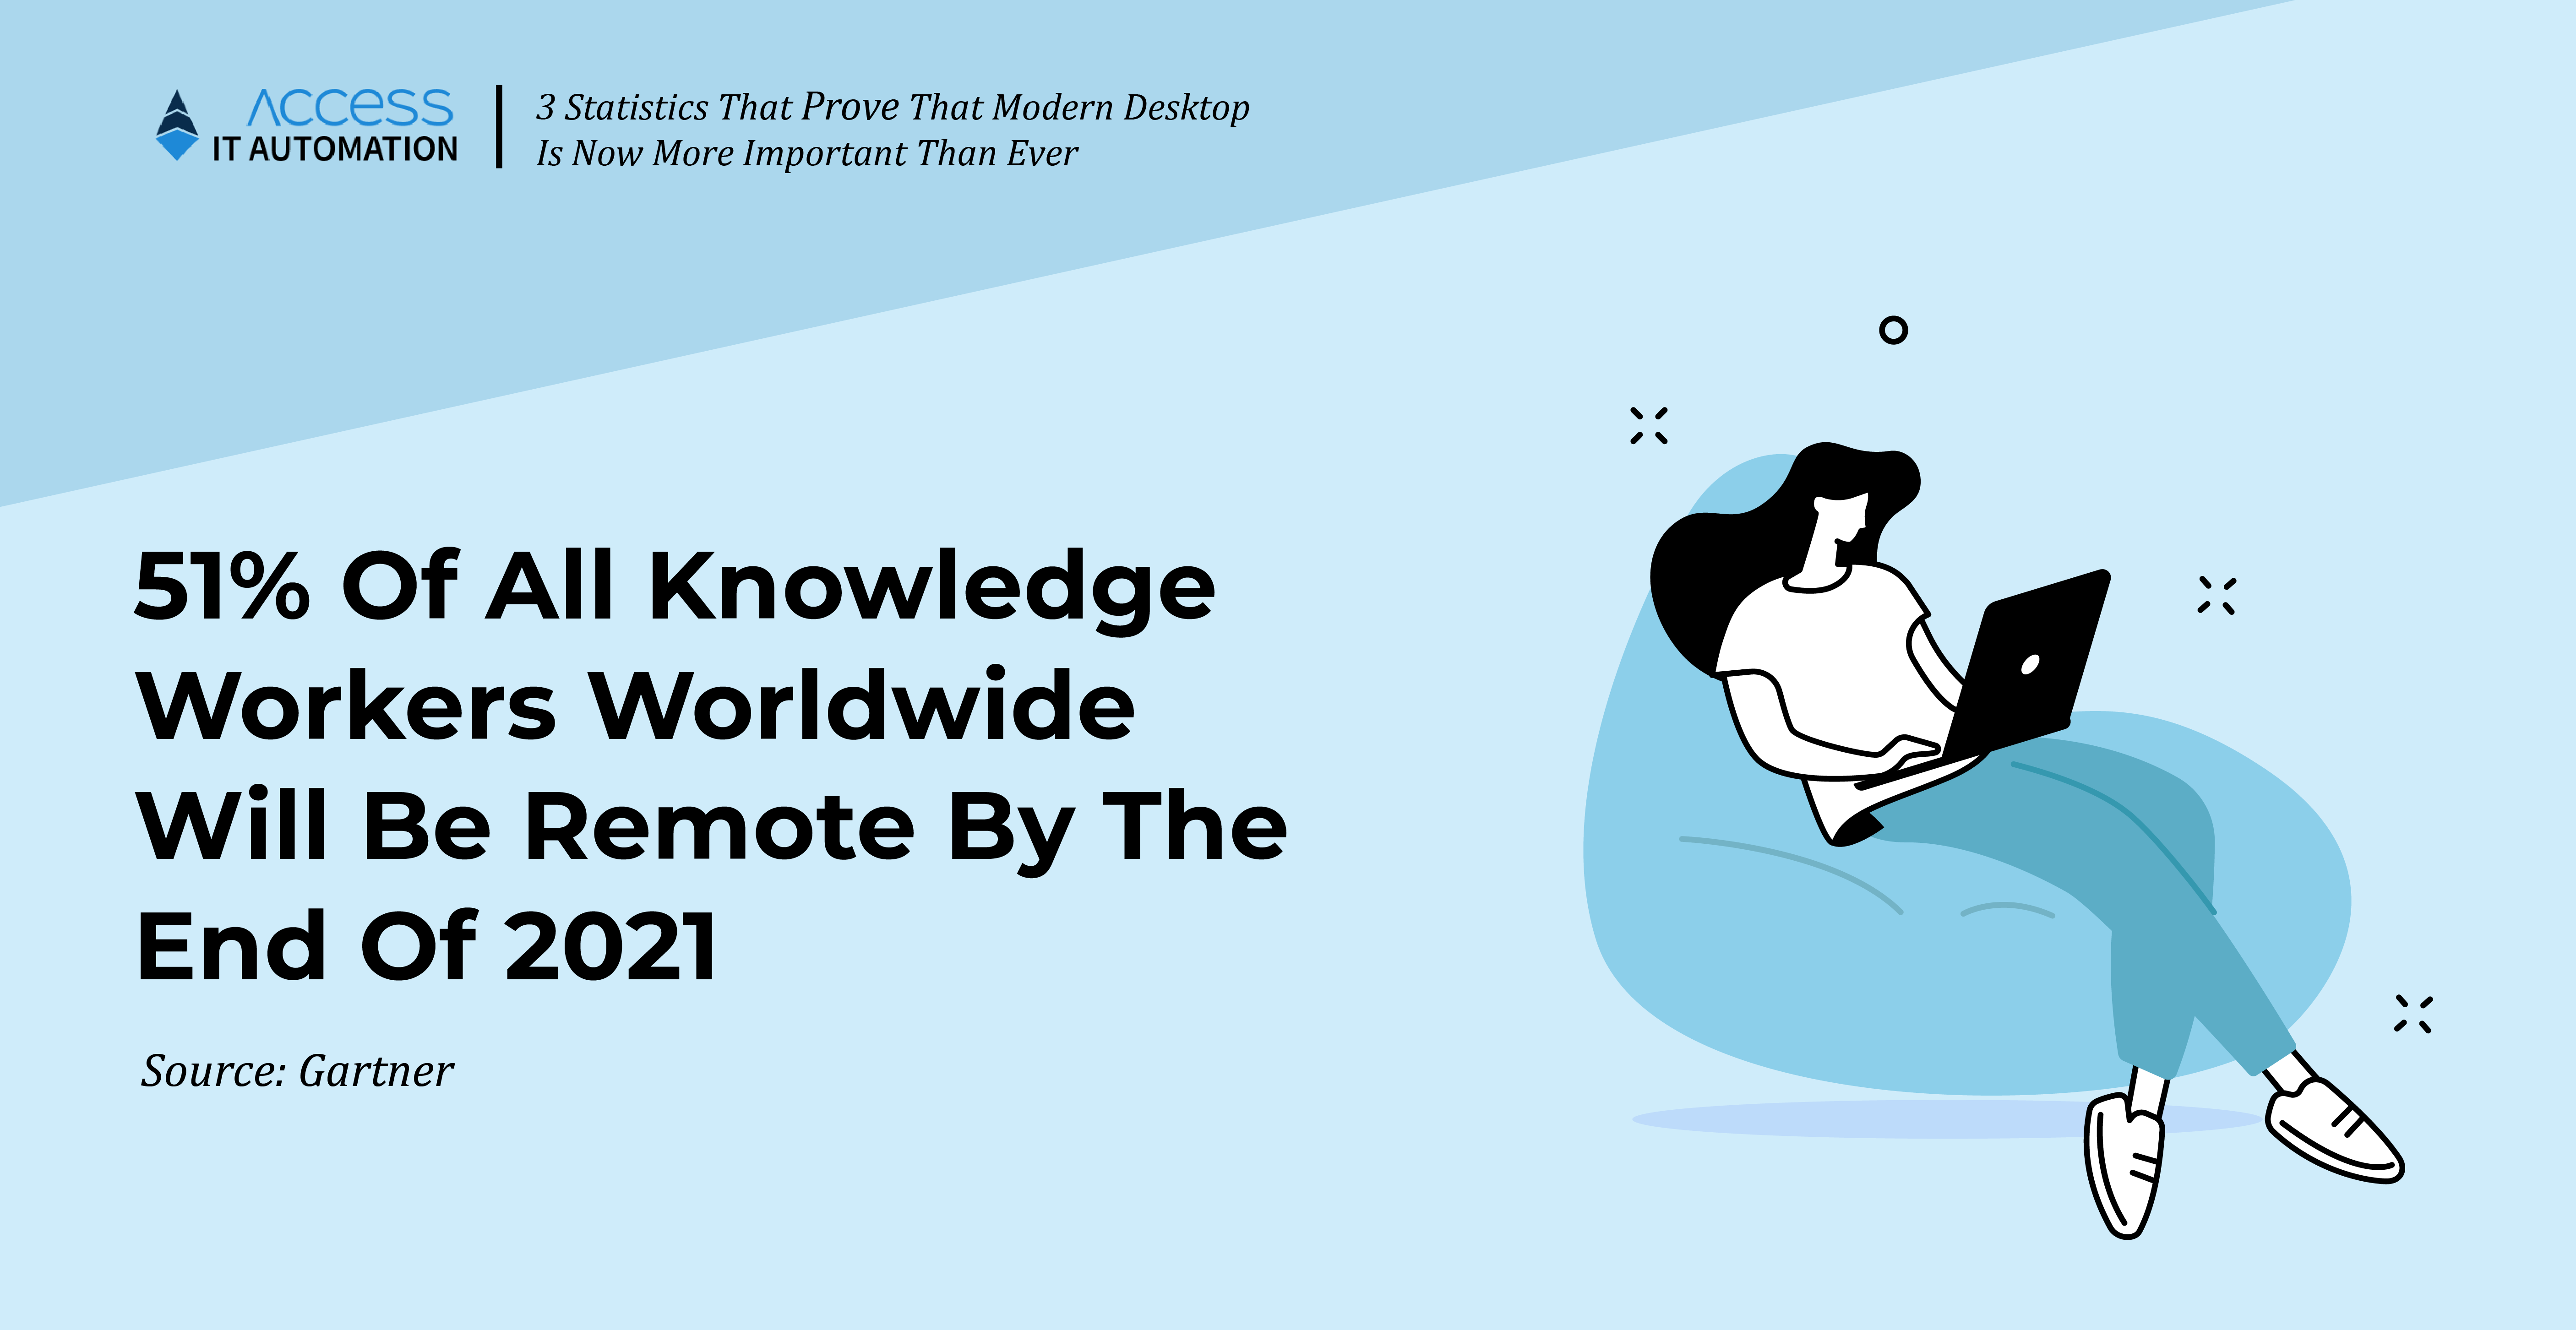 51% Of All Knowledge Workers Worldwide Will Be Remote By The End Of 2021